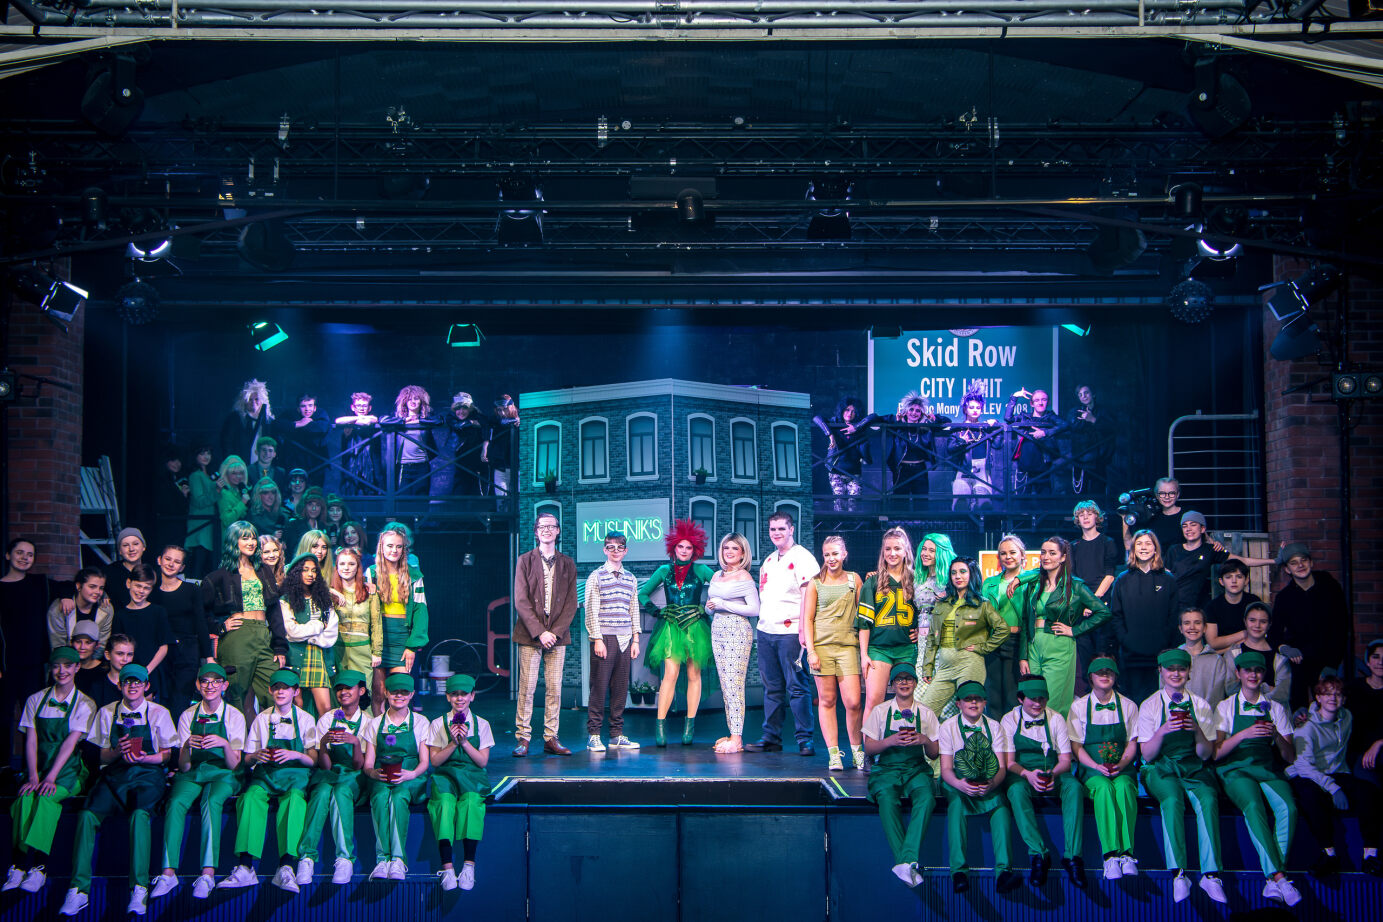 Little Shop of Horrors receives rapturous applause - a review by Mr Smyth